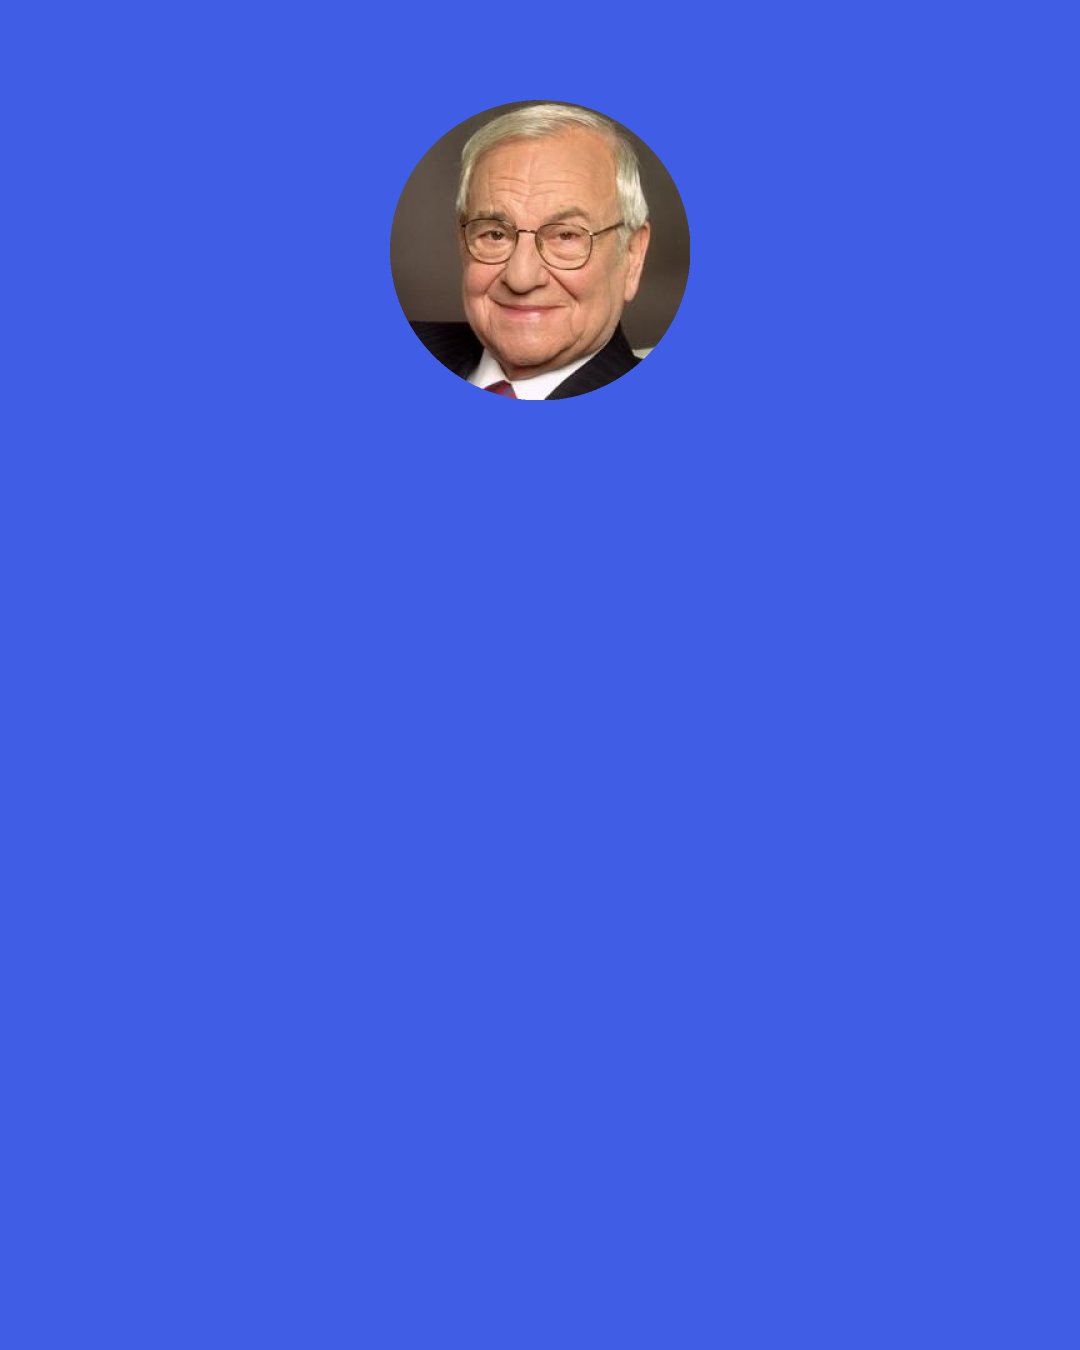 Lee Iacocca: Over the years, many executives have said to me with pride: 'Boy, I worked so hard last year that I didn't take any vacation.' I always feel like responding, "You dummy. You mean to tell me you can take responsibility for an eighty-million-dollar project and you can't plan two weeks out of the year to have some fun?